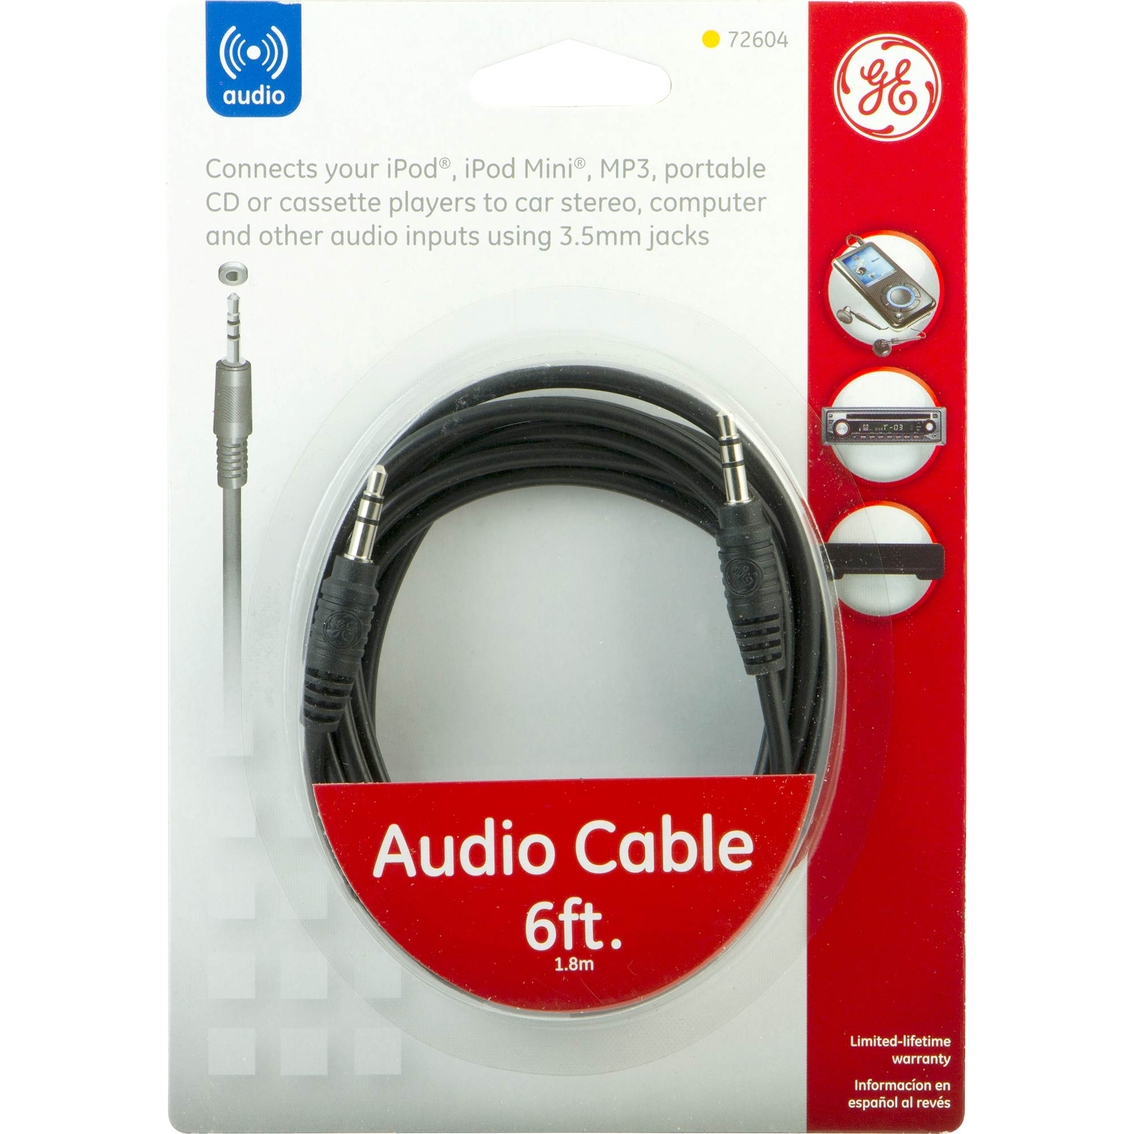 GE 6 Ft. Audio Cable, 3.5mm plugs - Image 2 of 2